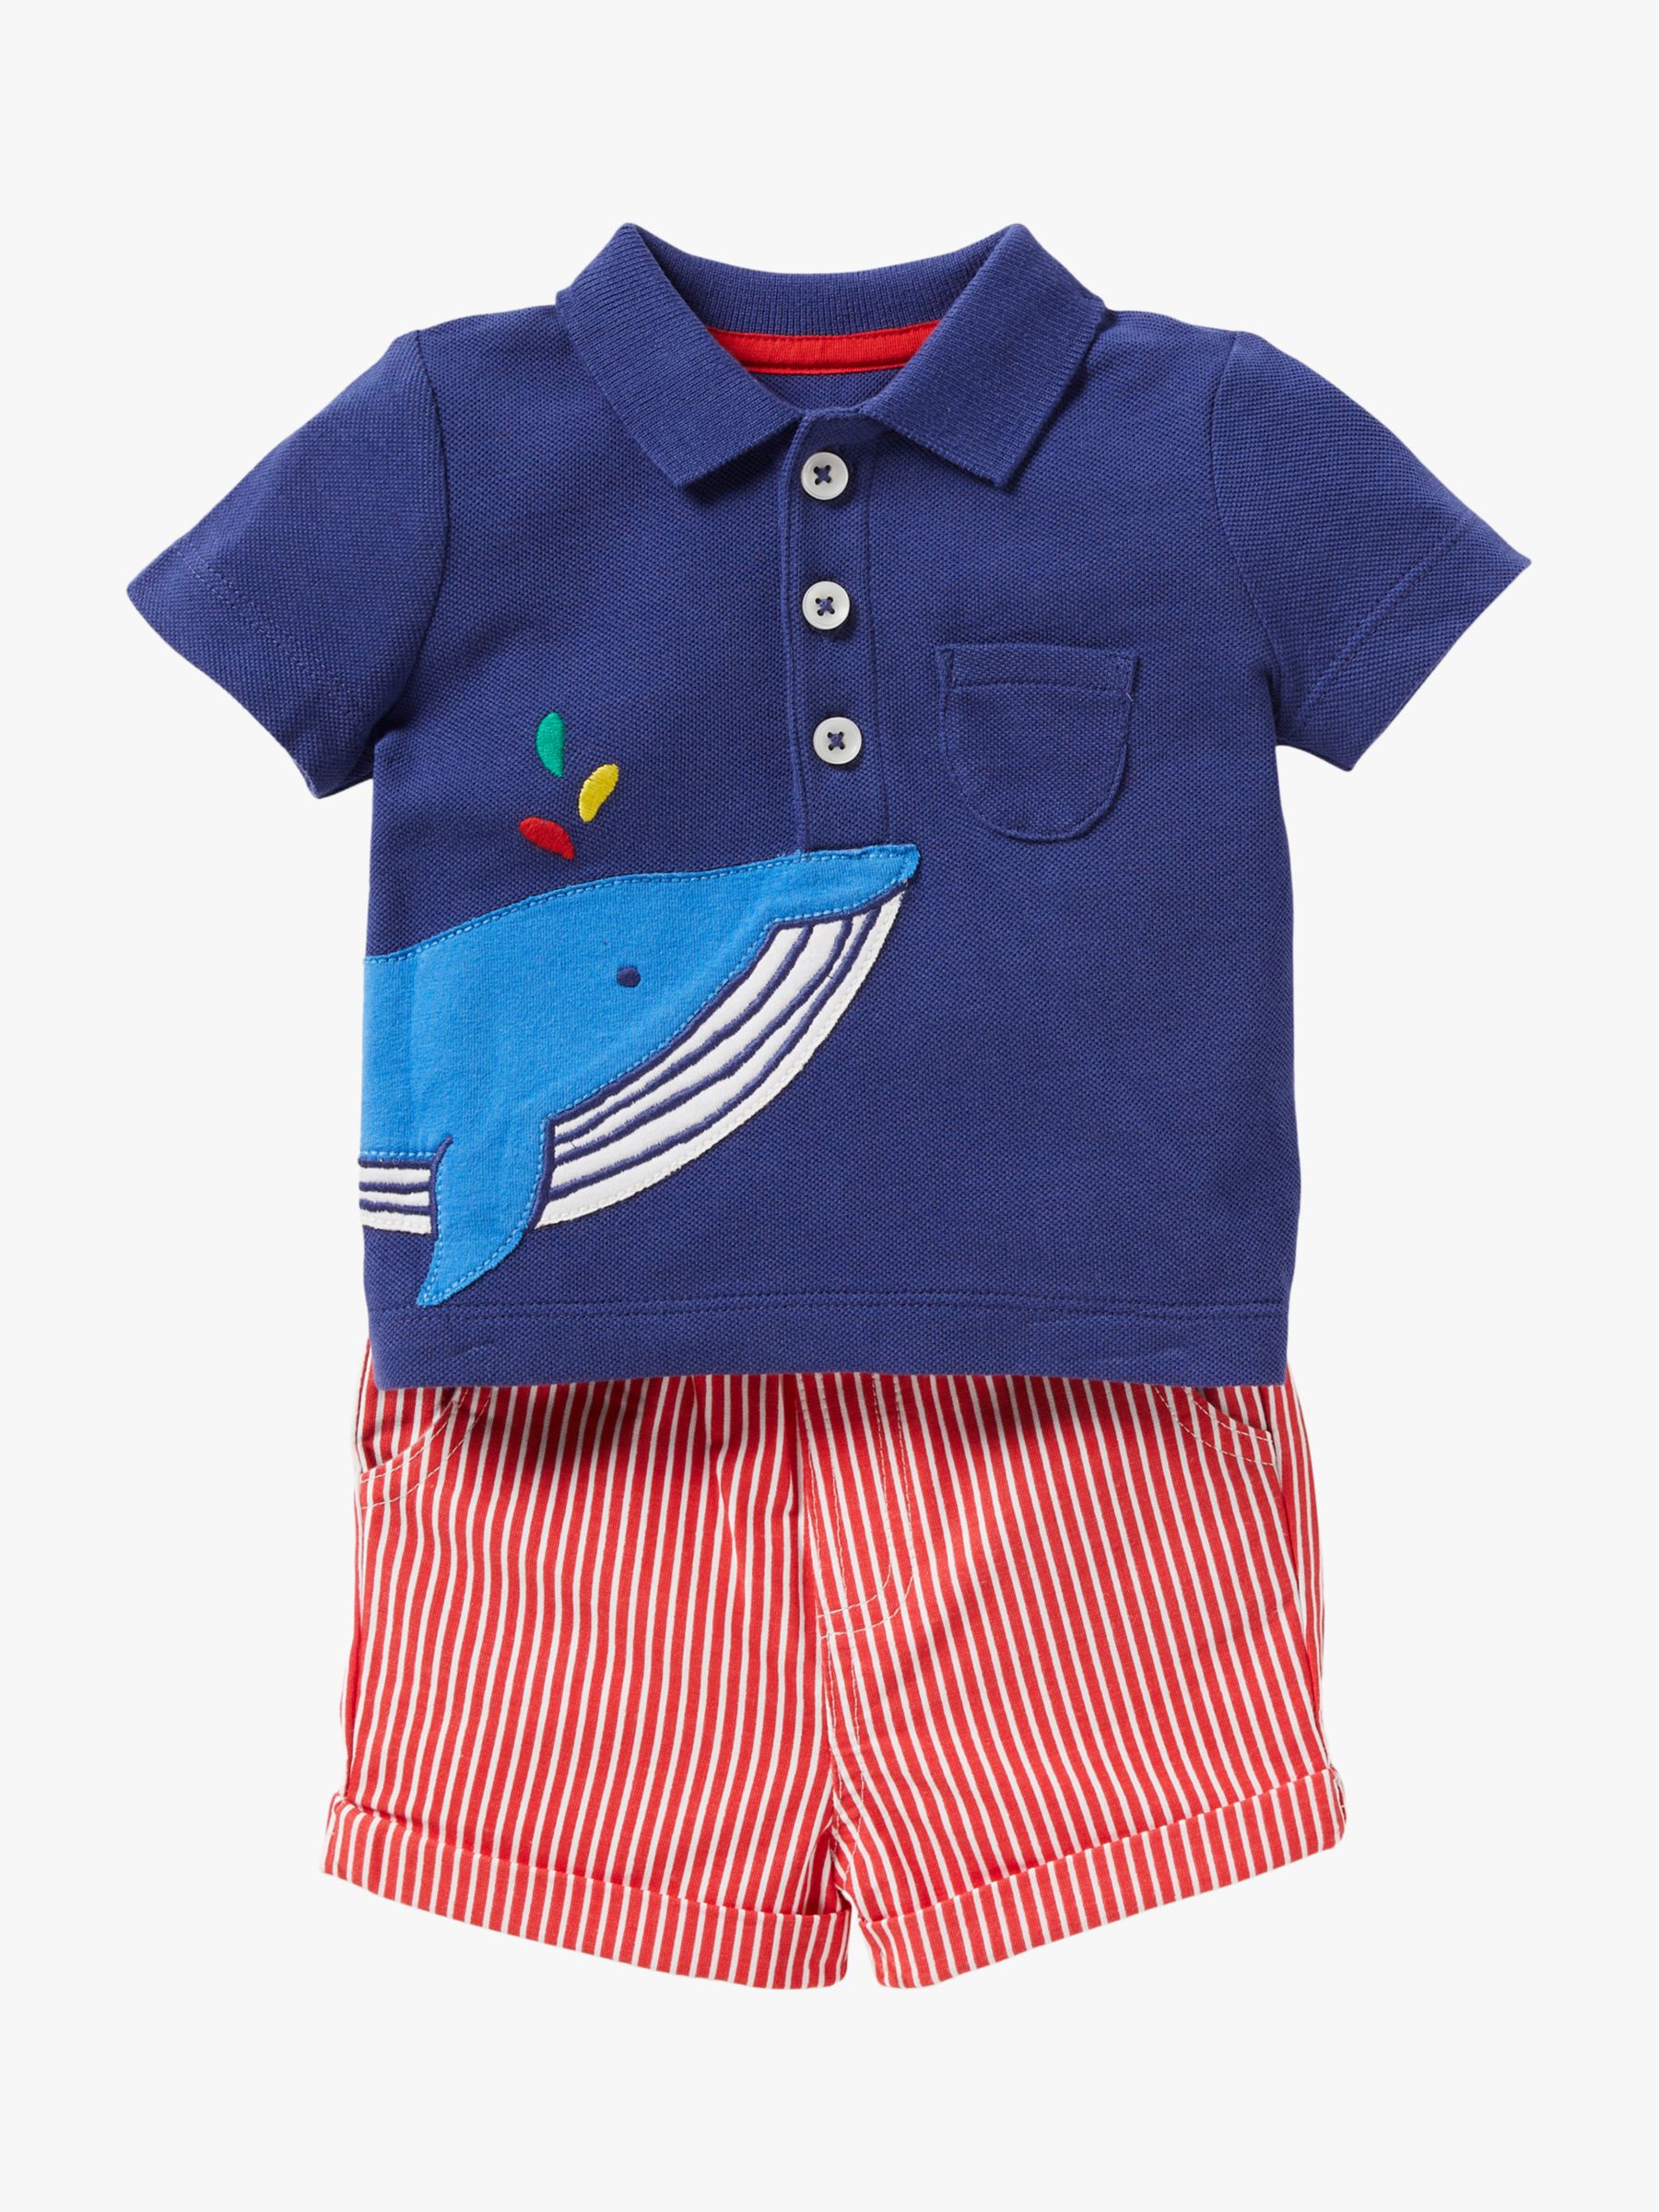 Baby Boden Stripe Jersey Polo T-shirt Was £30 Now £9.99